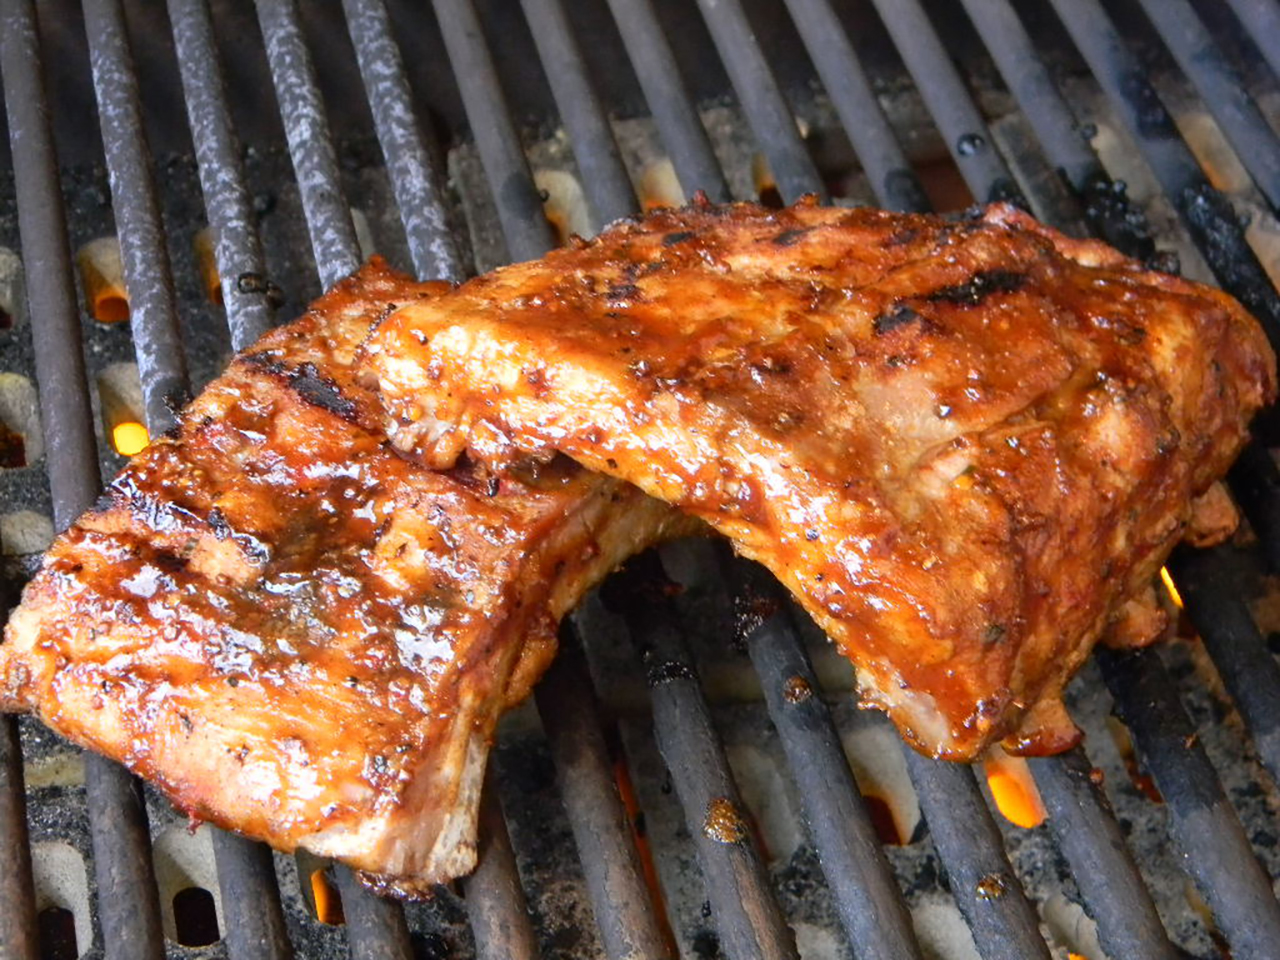 Steakhouse Ribs - New York Style